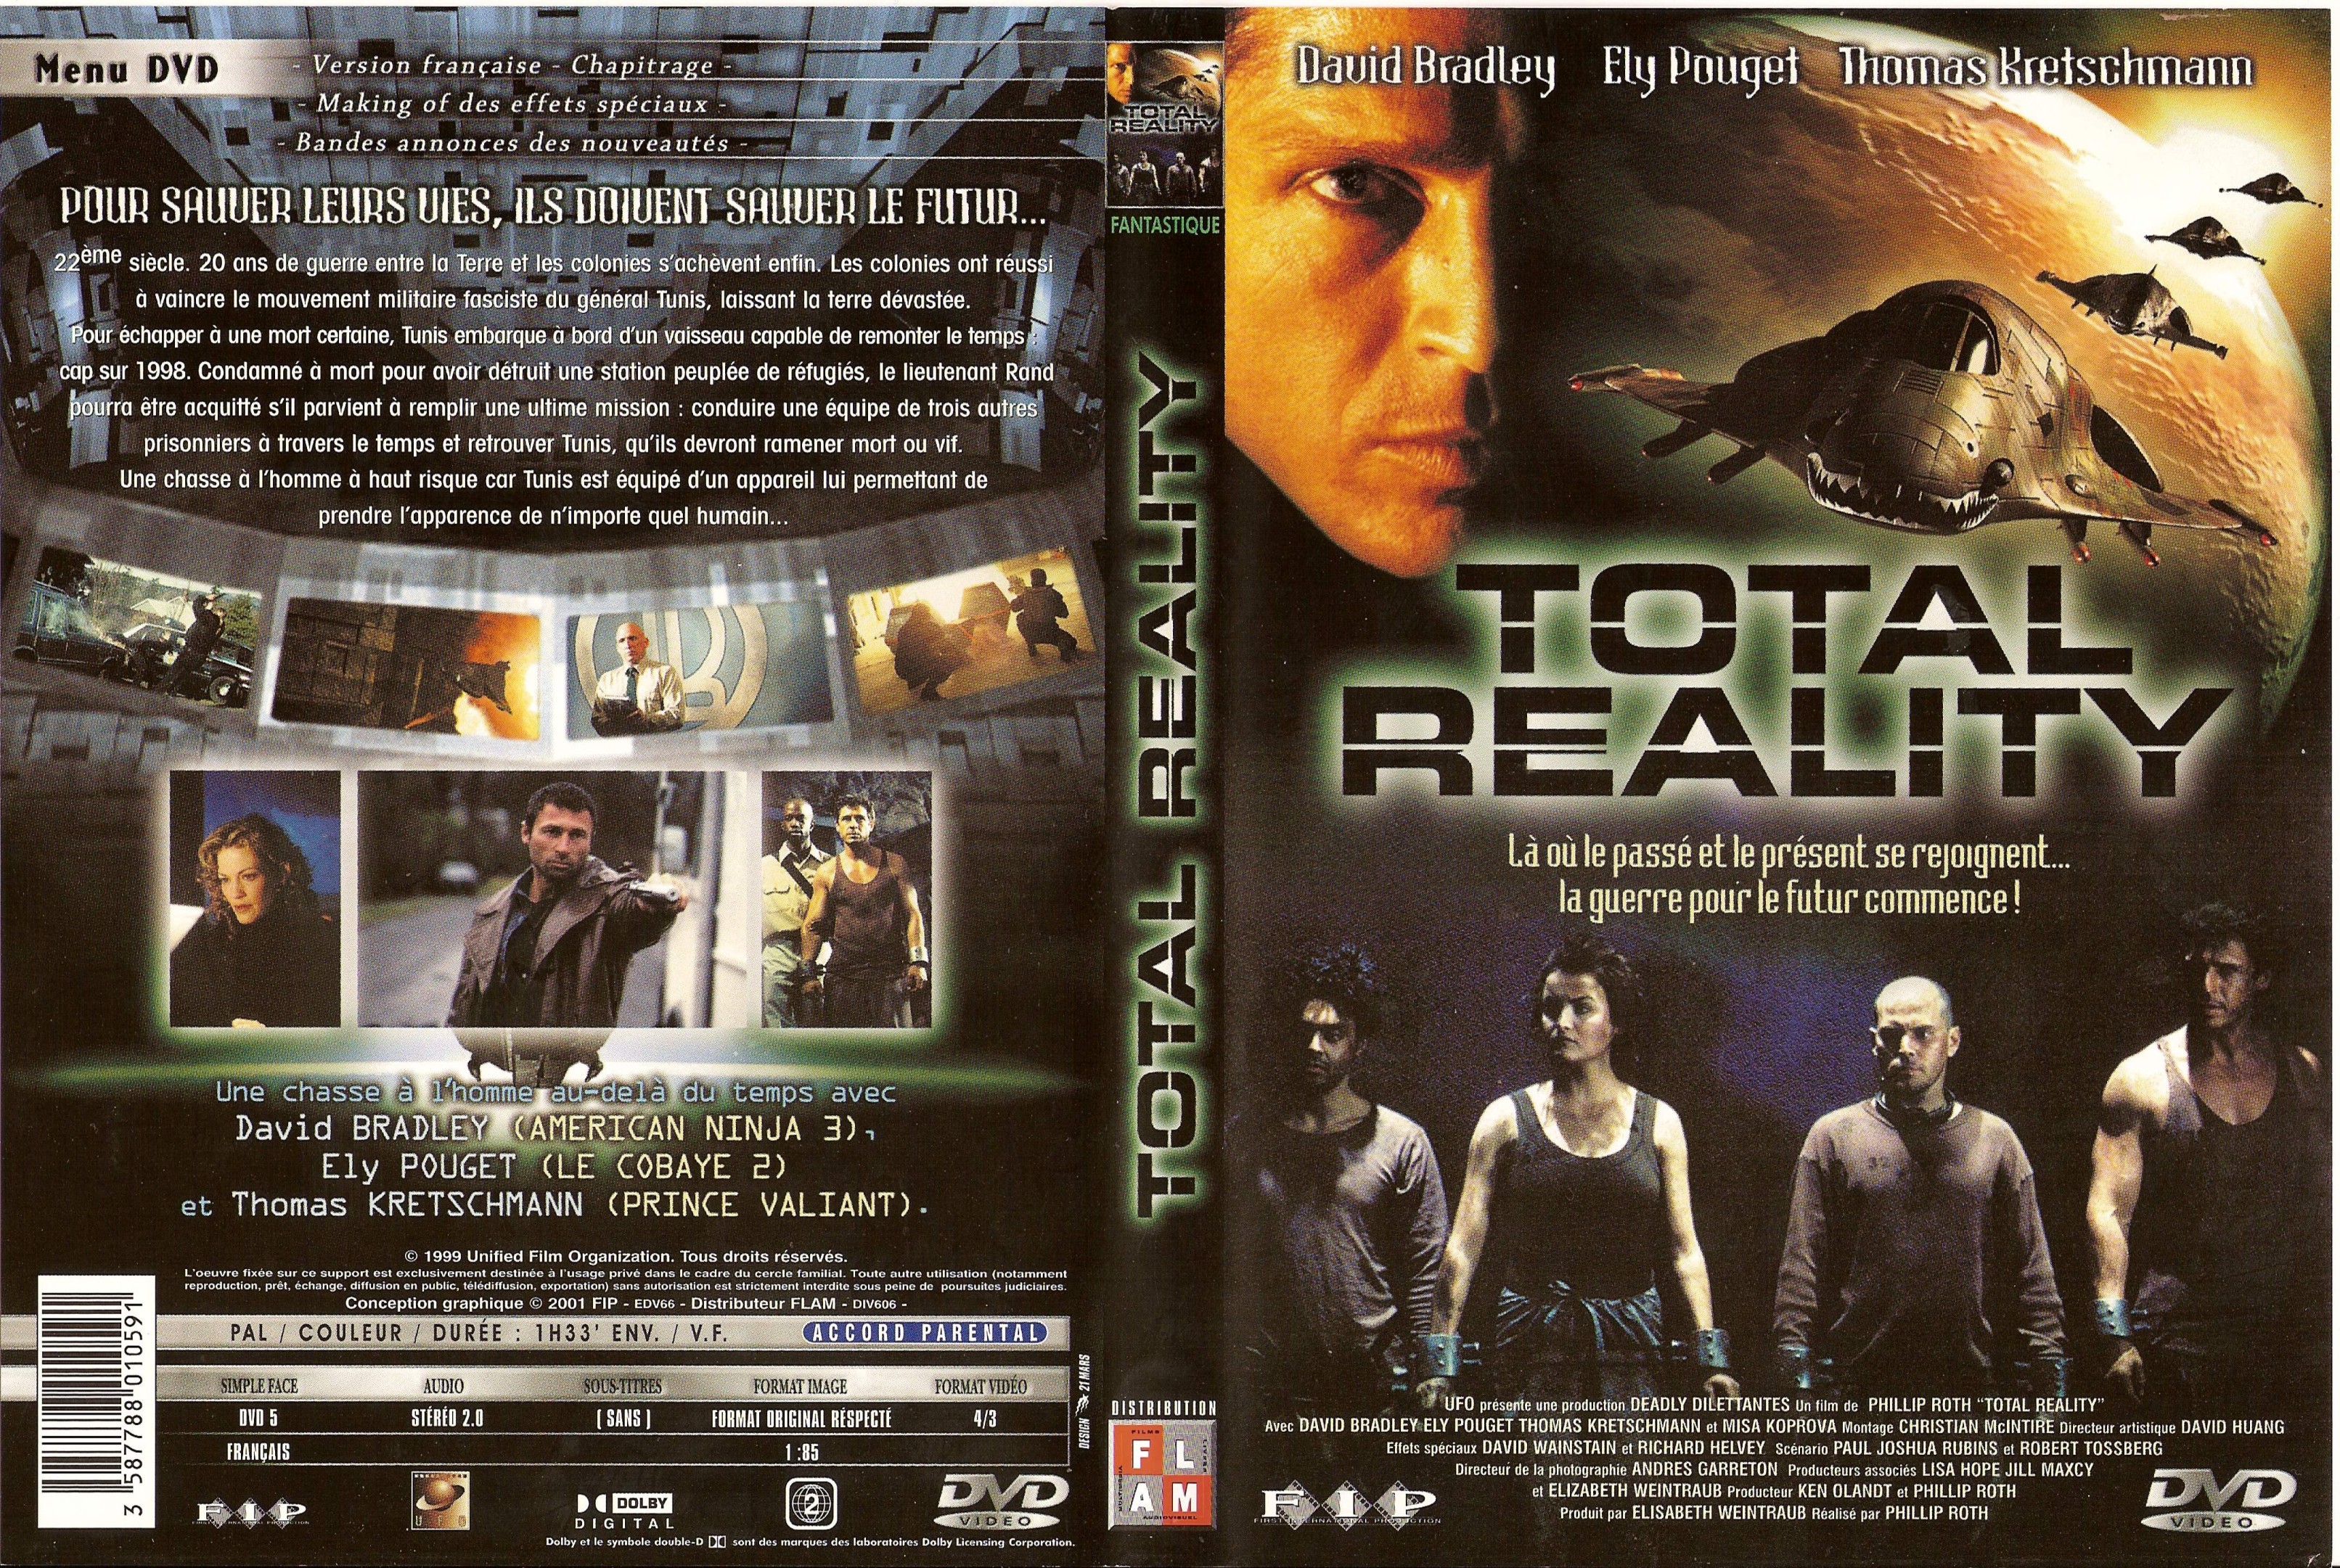 Jaquette DVD Total reality